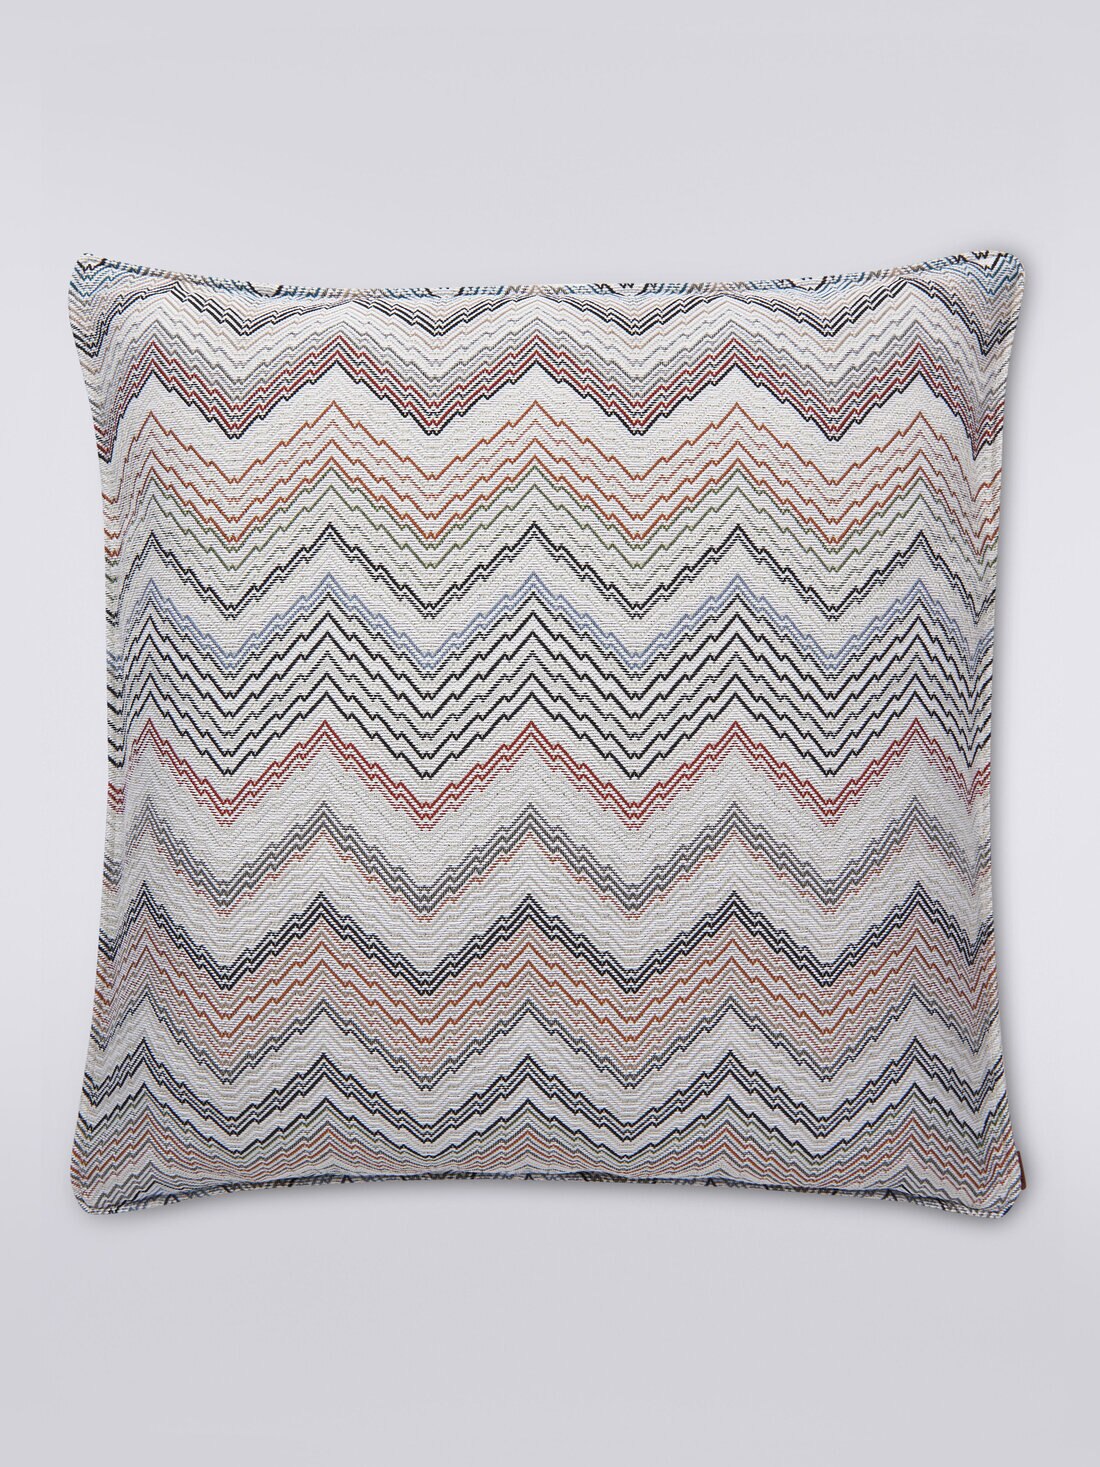 Milano 60x60 cm cushion with knitted effect, White  - 8051575830587 - 0